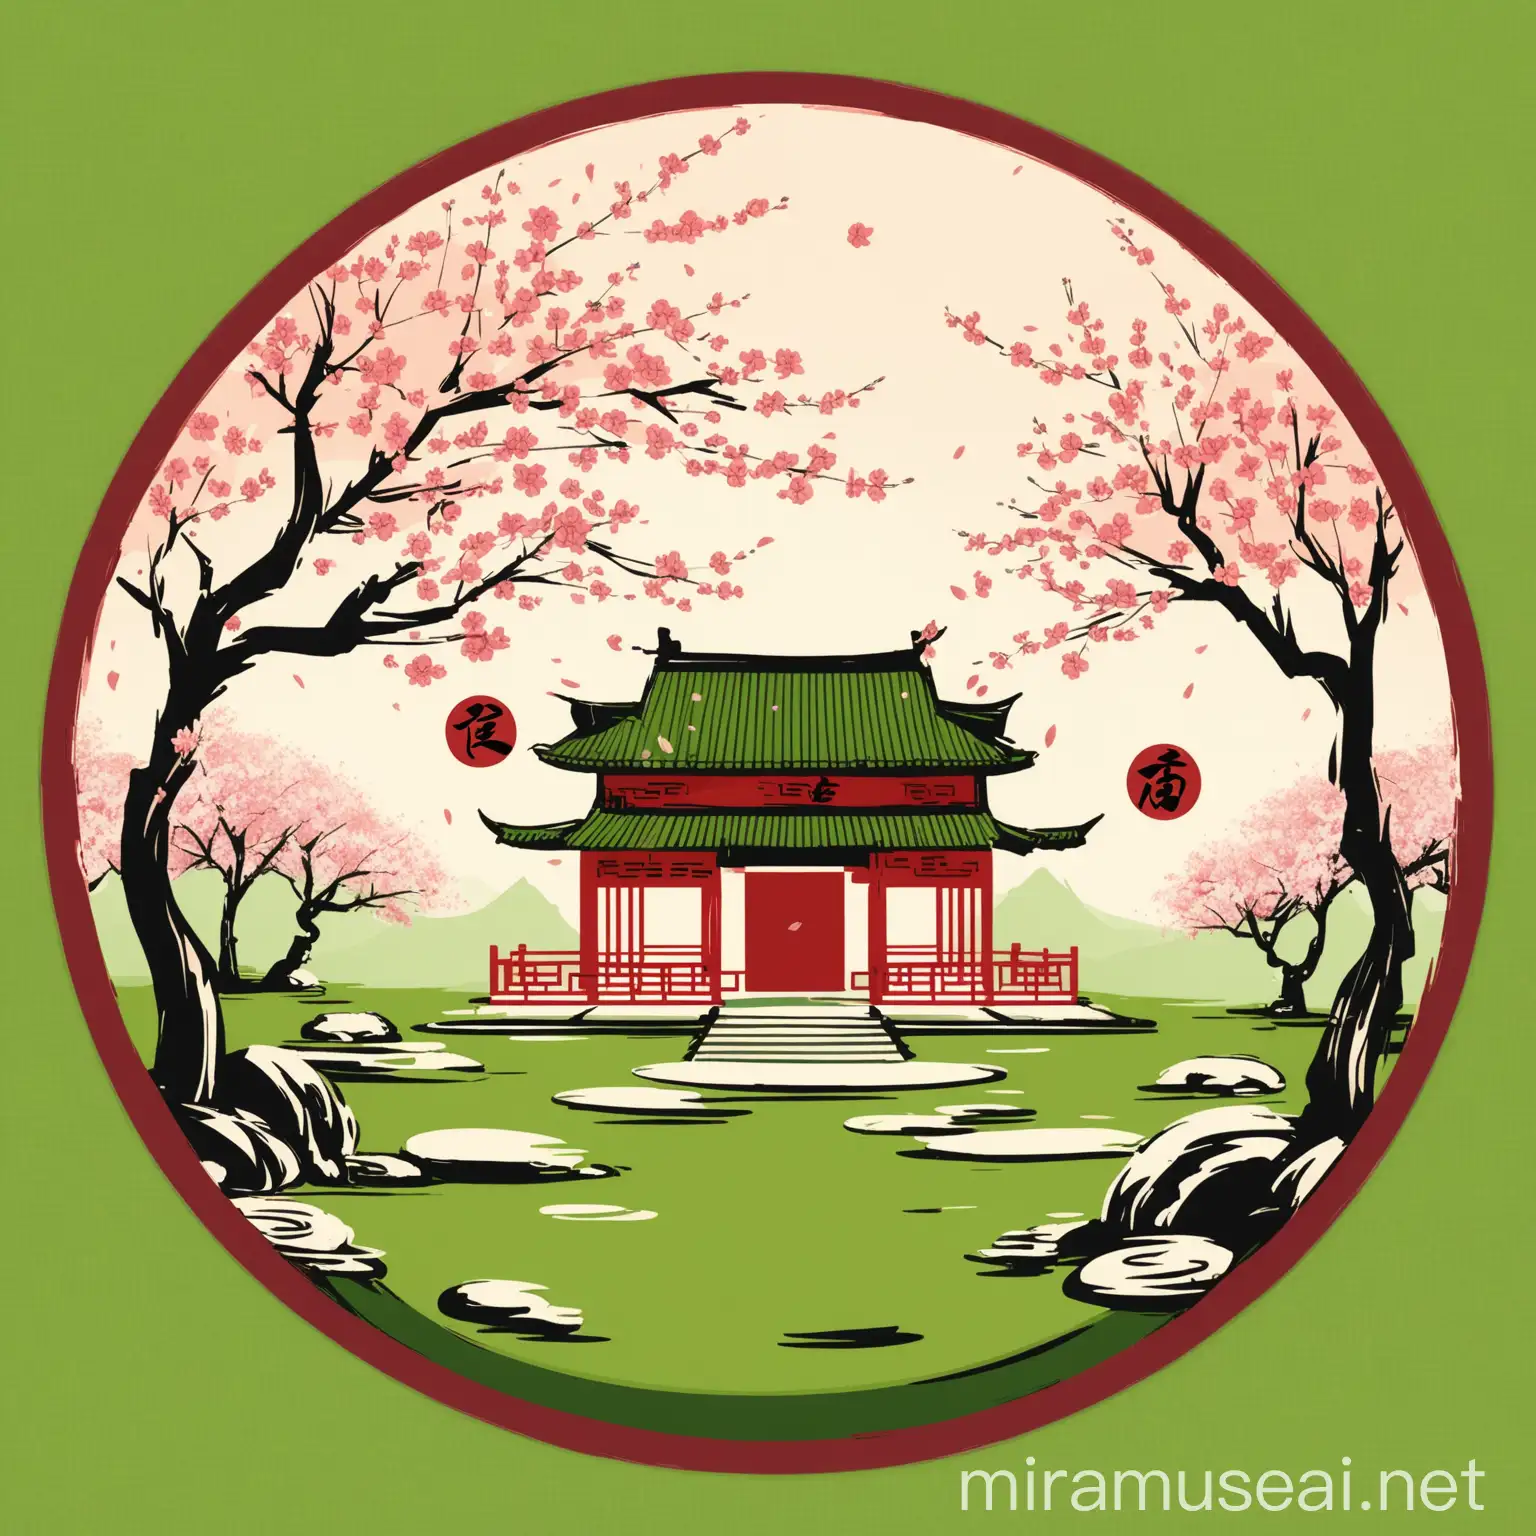 Chinese Tea House with Cherry Blossom Trees in Low Detail Caligraphy Strokes Style